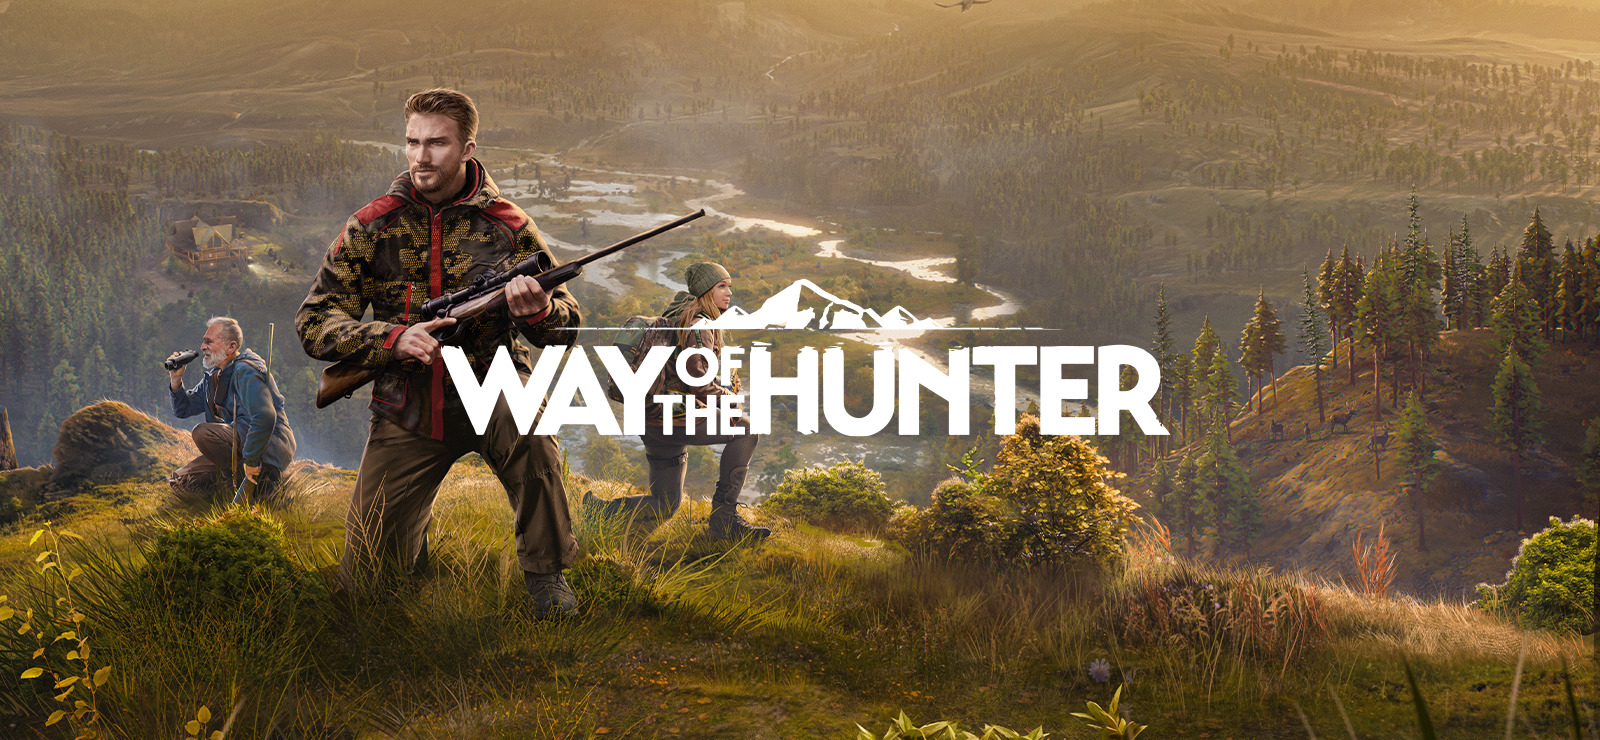 theHunter : Call of the Wild - Get This Game For FREE!